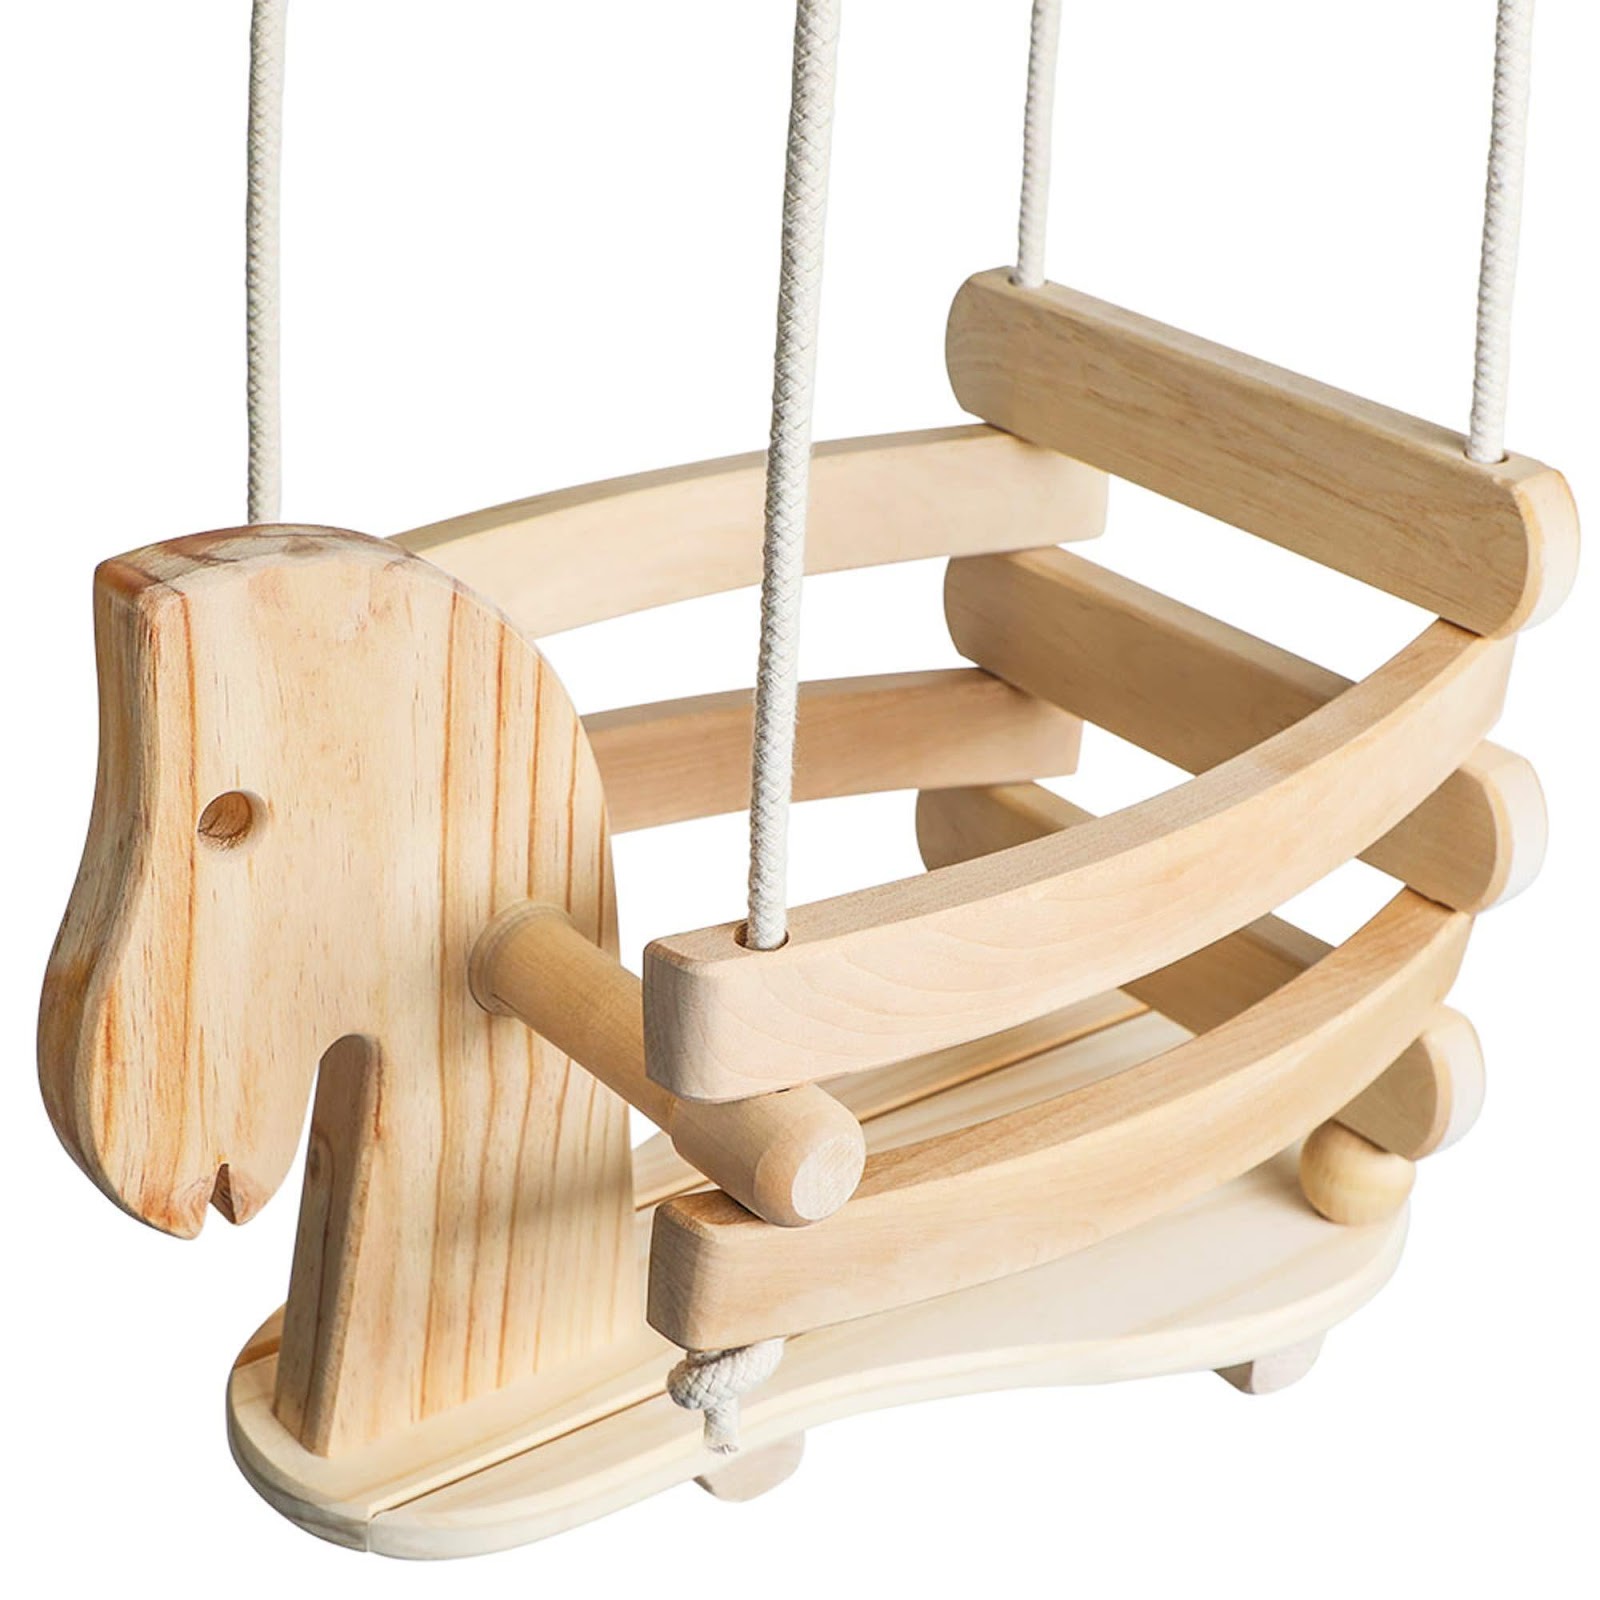 Wooden Horse Toddler Swing to be used outdoors